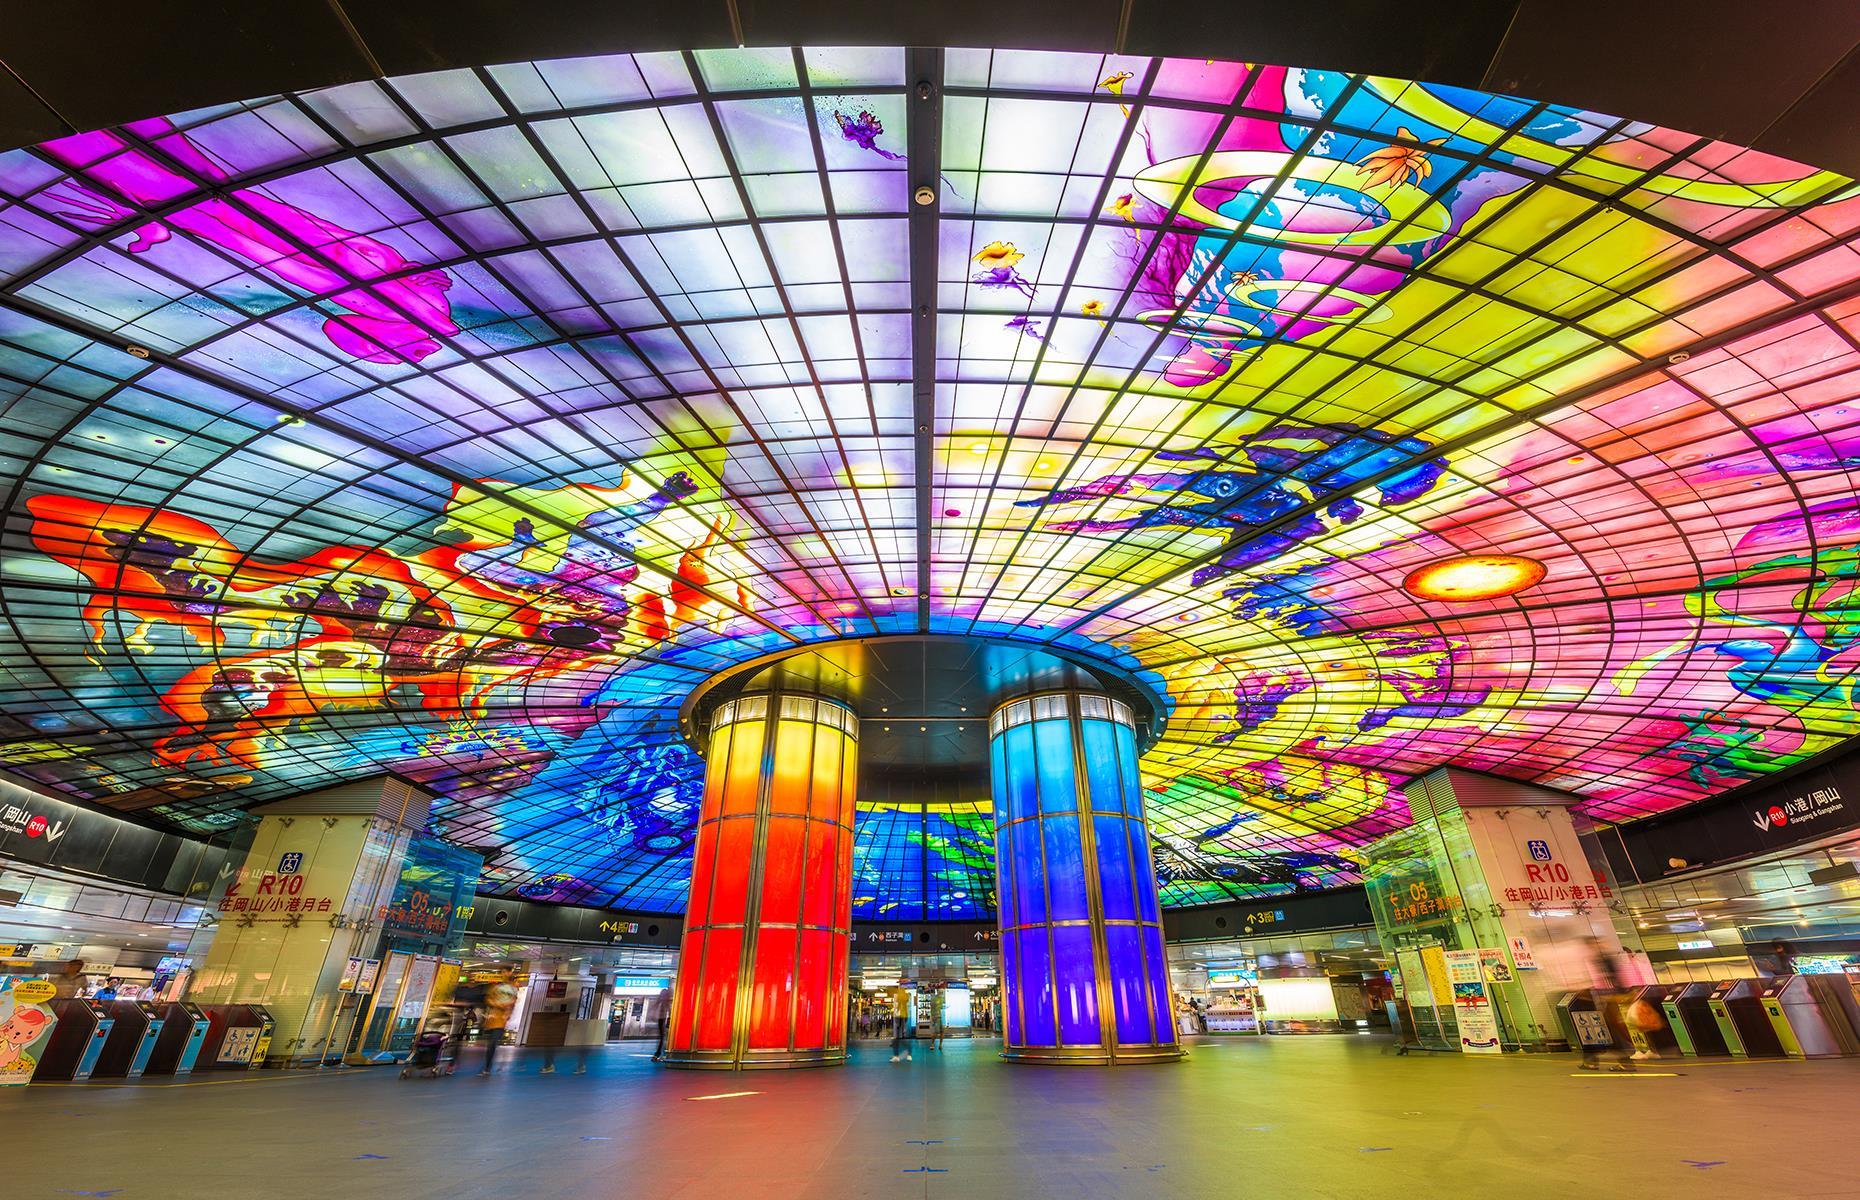 <p>The kaleidoscope-like glass ceiling at the Formosa Boulevard station is said to be the largest glass work in the world. Consisting of 4,500 glass panels, it’s made by Italian designer Narcissus Quagliata, who called it <em>Wind, Fire and Time</em>.</p>